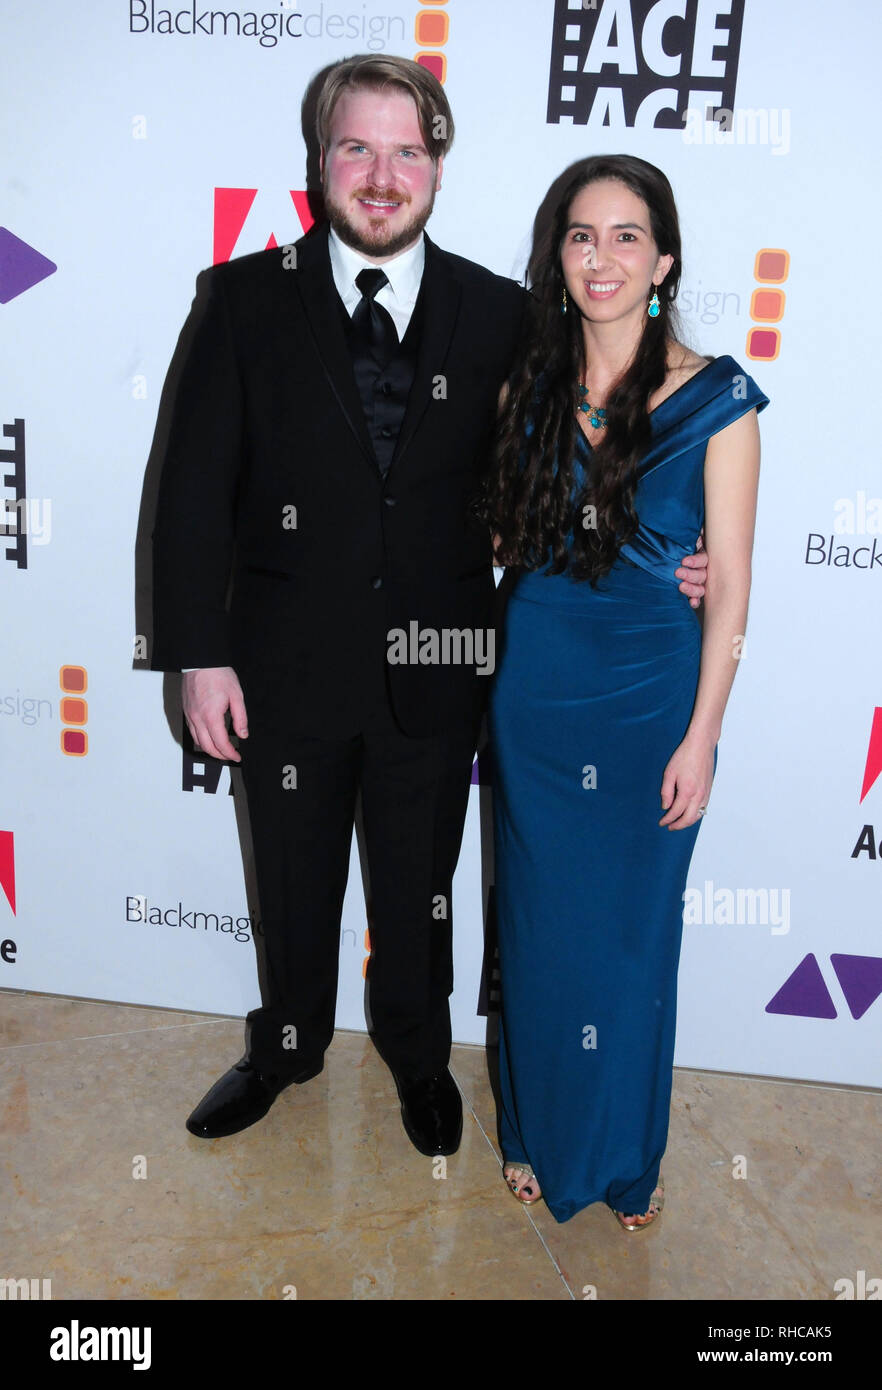 Beverley Hills, California, USA. 01st Feb, 2019. Editors Edward Bursch and Brooke Paha attend ACE 69th Annual Eddie Awards on February 1, 2019 at the Beverly Hilton Hotel in Beverly Hills, California. Credit: Barry King/Alamy Live News Stock Photo